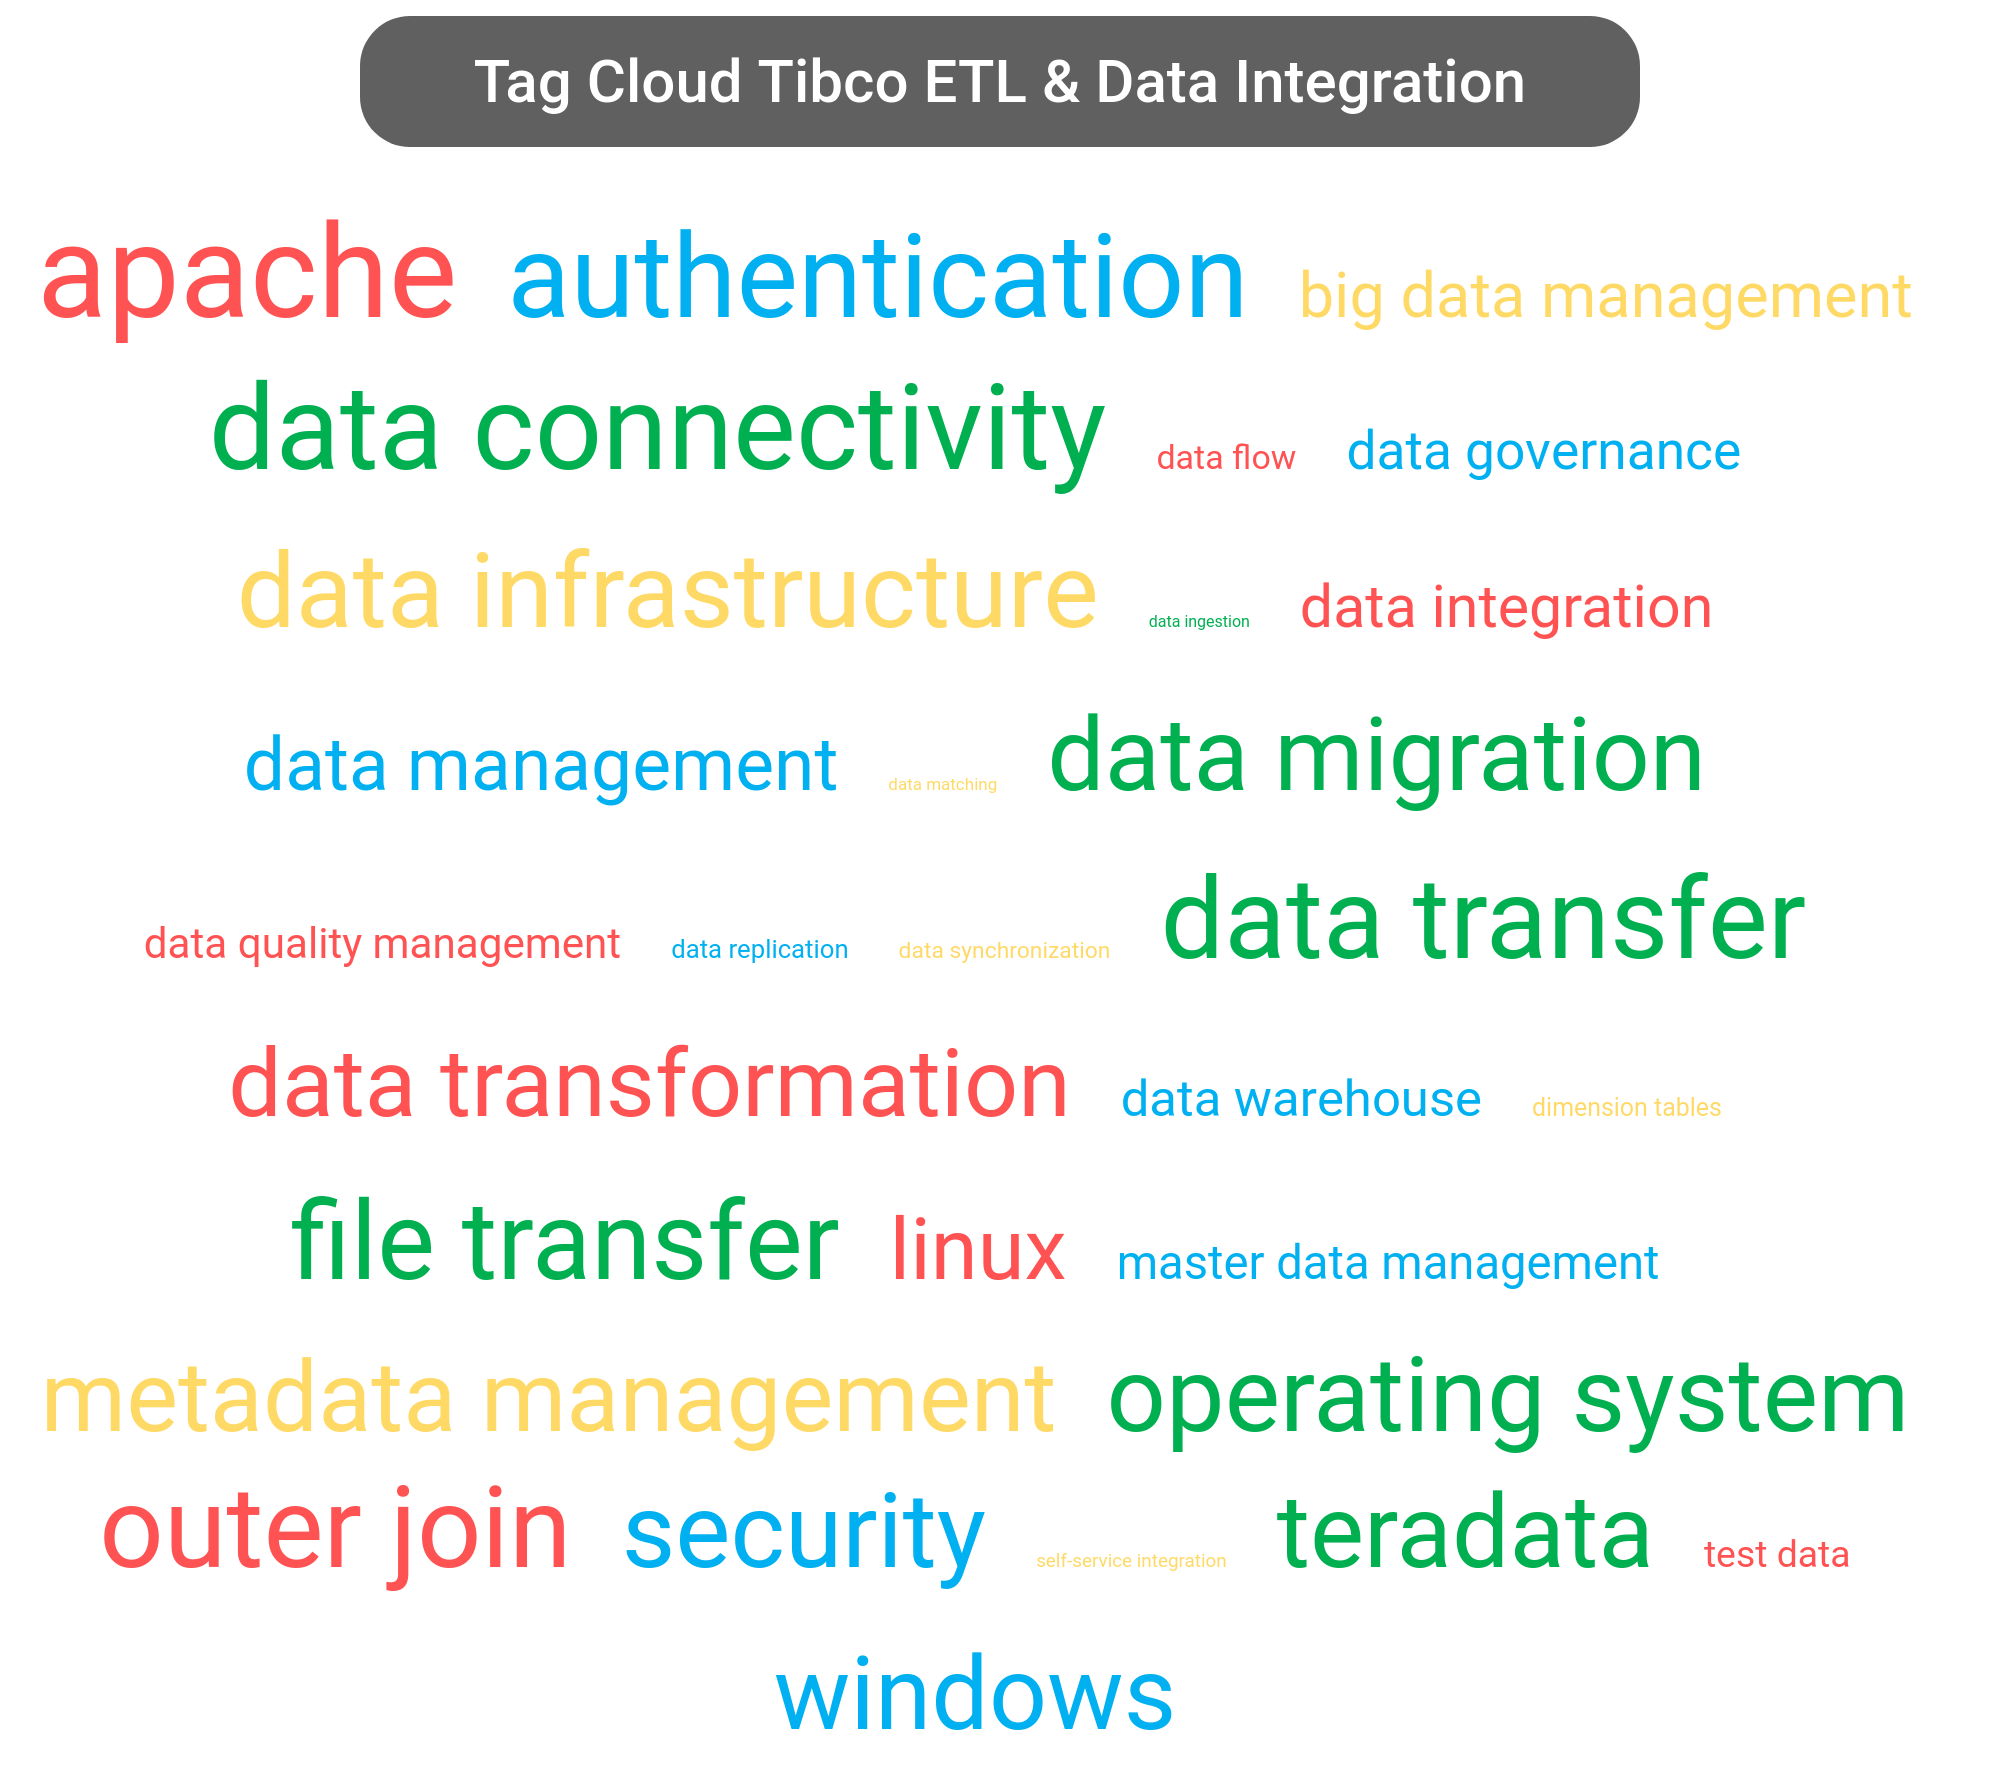 Tag cloud of the Tibco Data Management software.